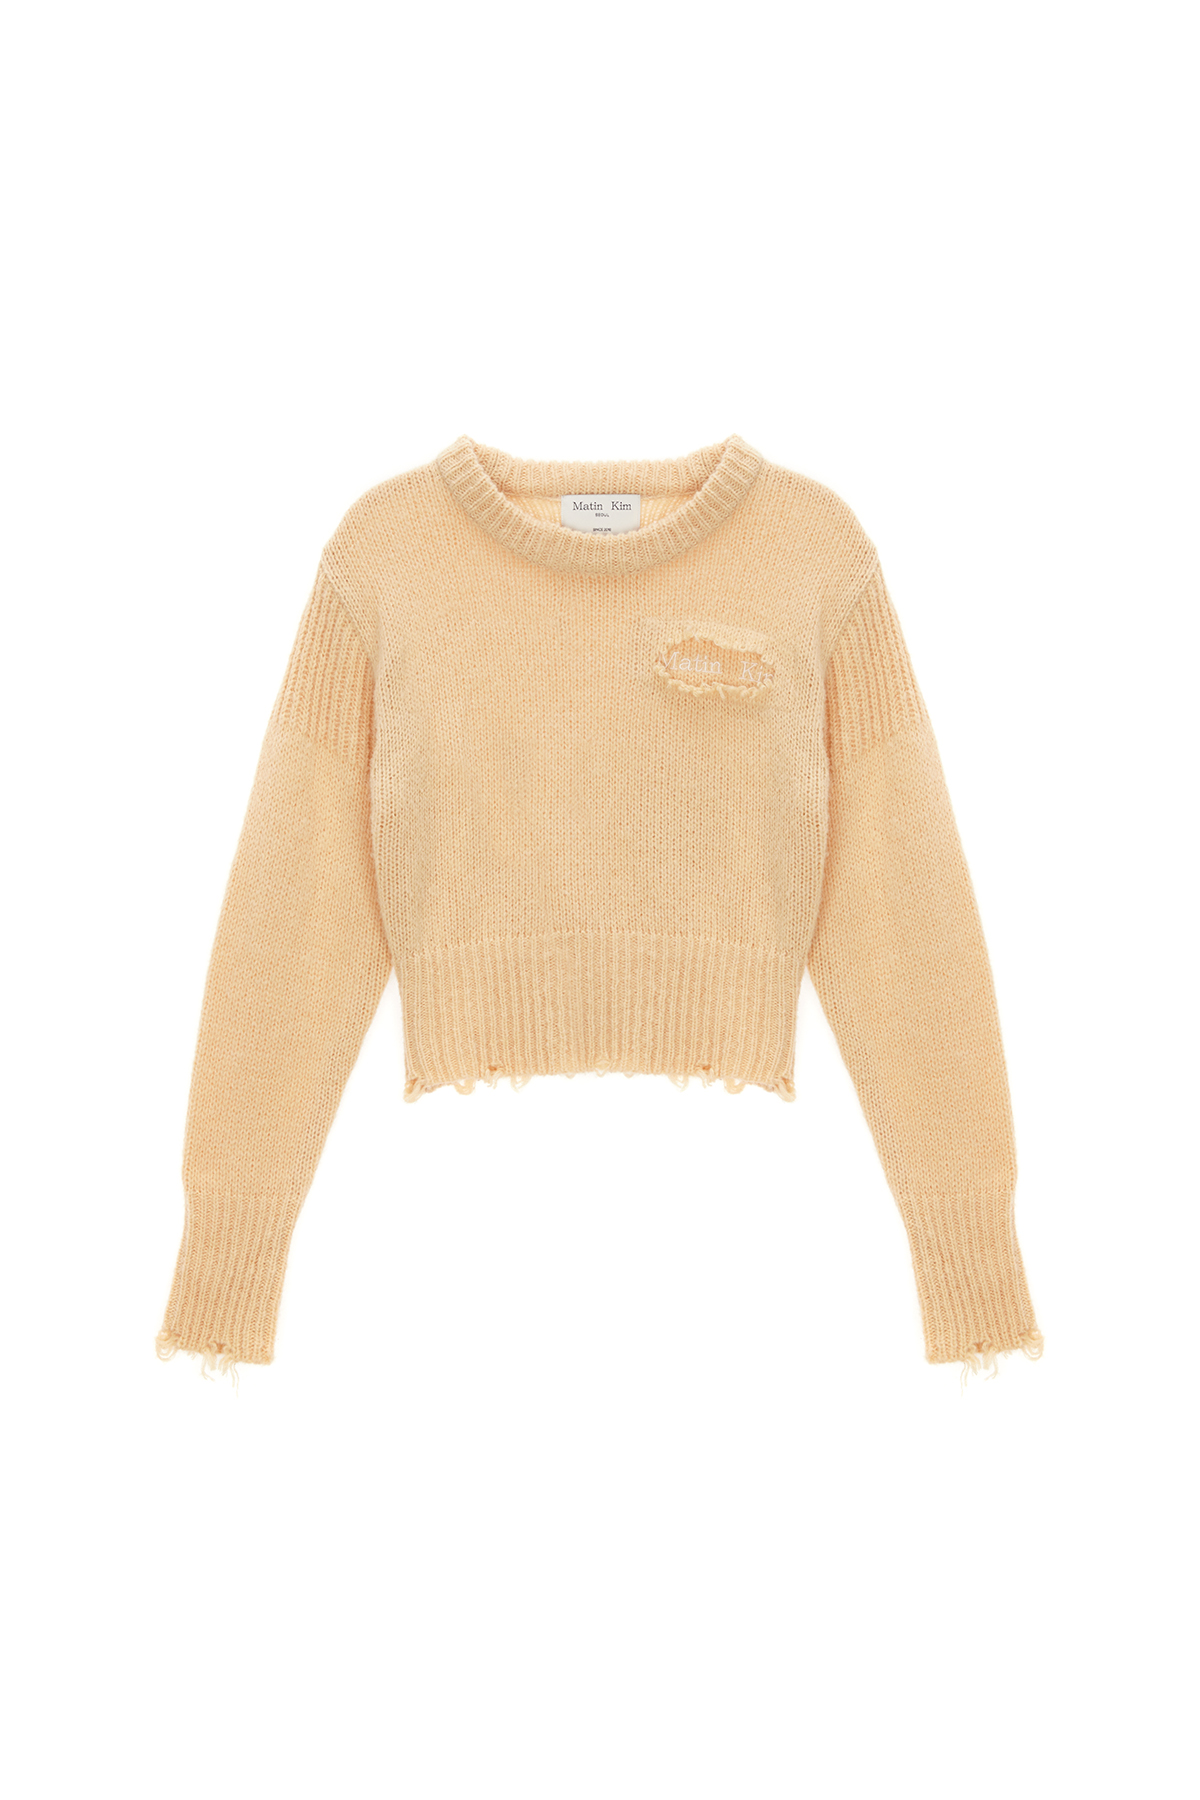 DAMAGE SOLID KNIT PULLOVER IN LIGHT YELLOW